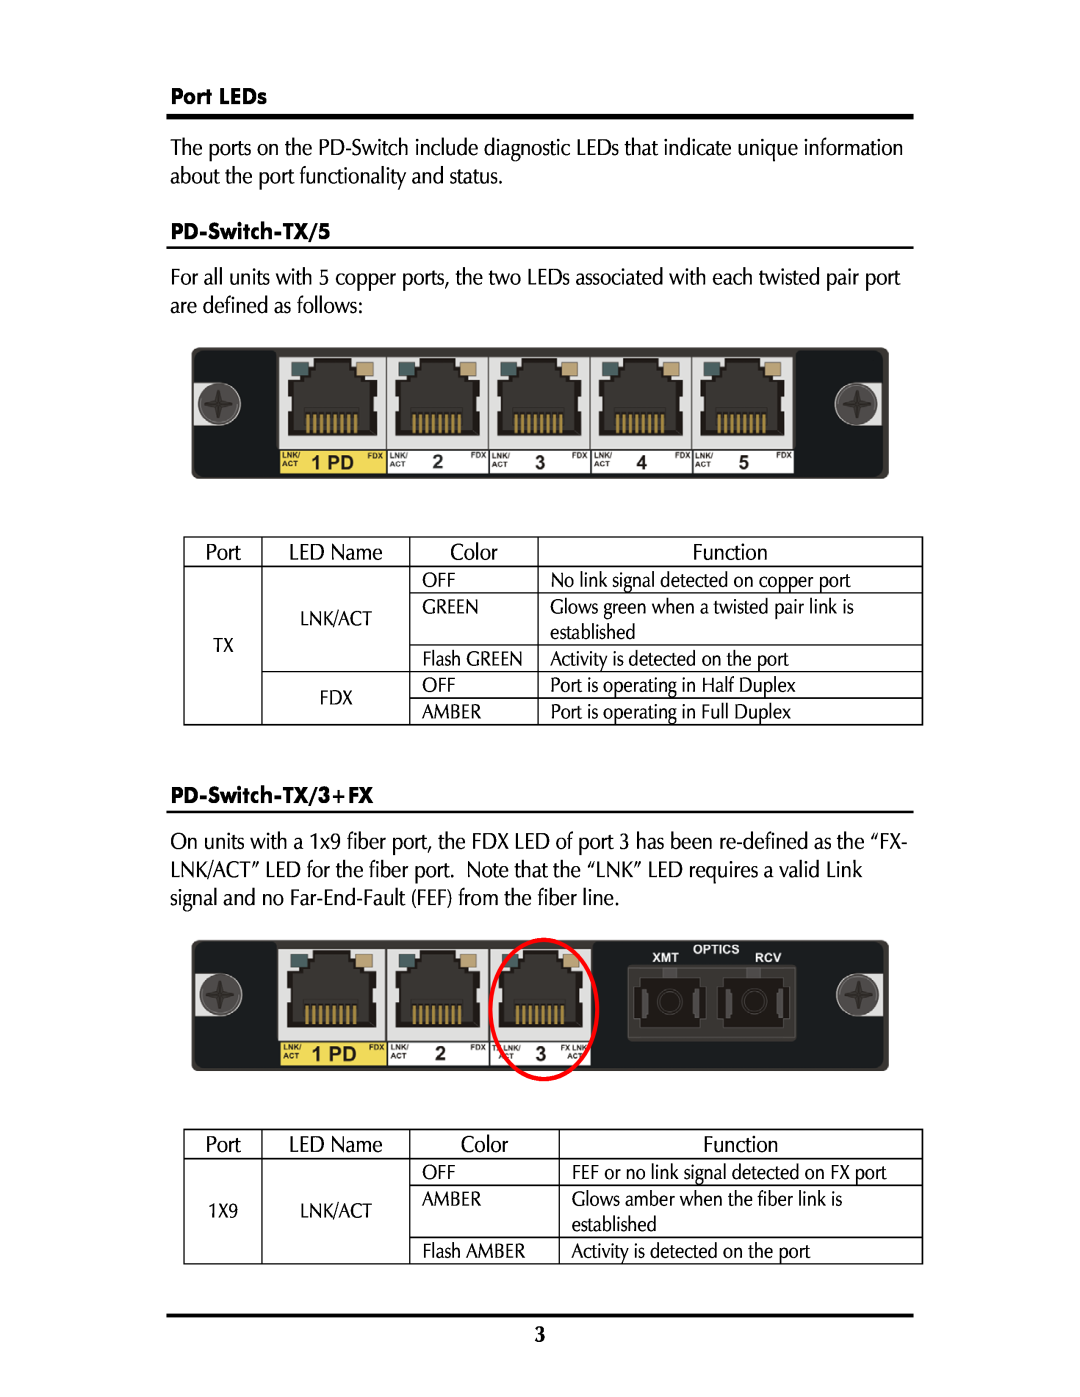 IMC Networks operation manual Port LEDs, PD-Switch-TX/5, PD-Switch-TX/3+FX, Lnk/Act 